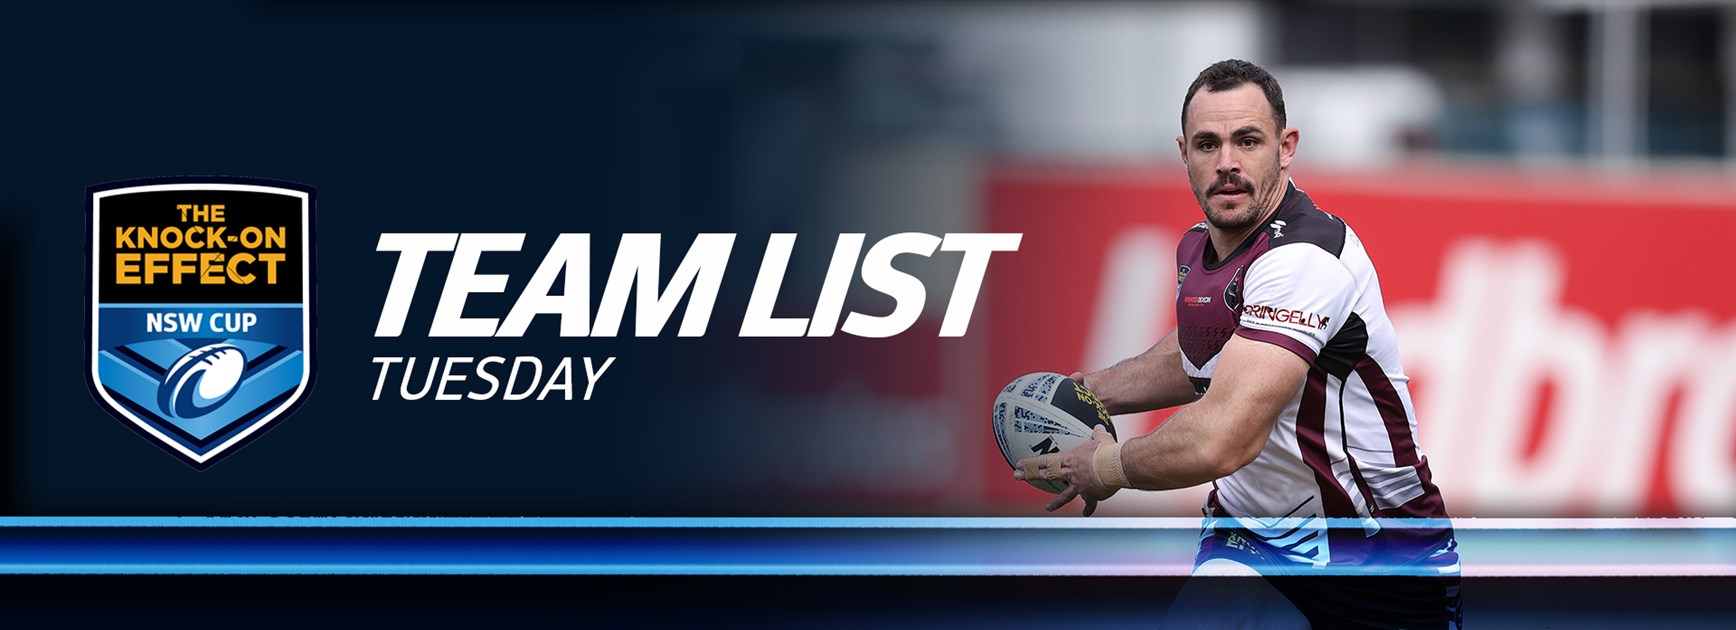 Team List Tuesday | The Knock-On Effect NSW Cup - Round 26